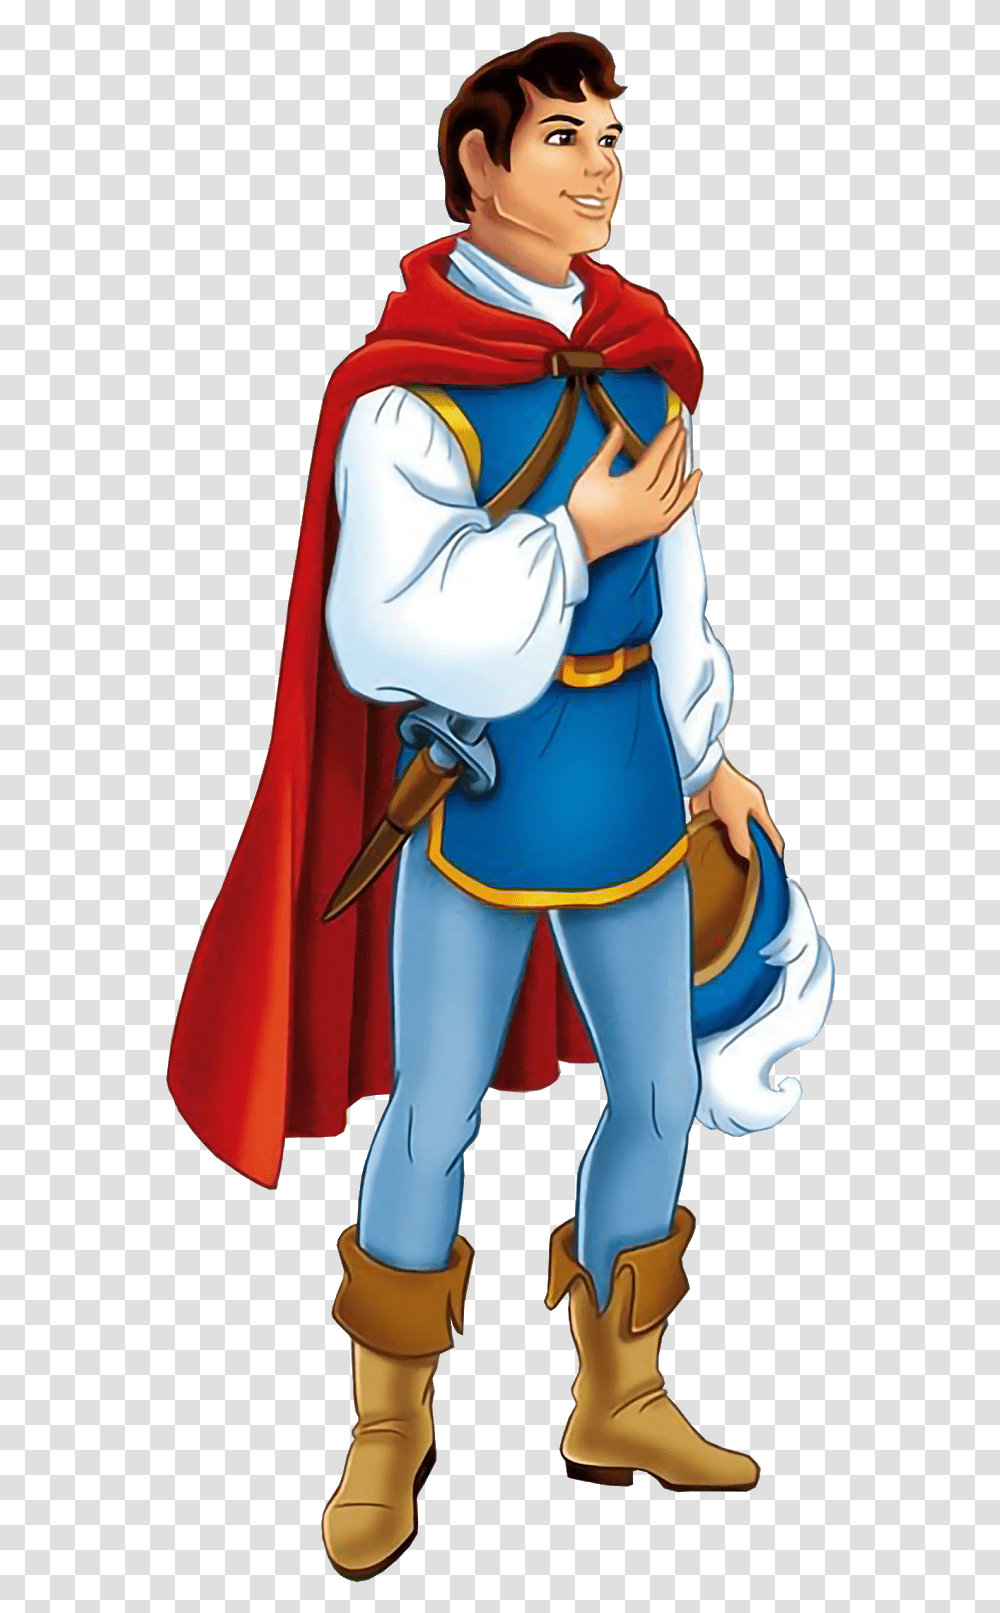 Snow White And Prince Charming Clipart Animal Crossing New Horizons Knight Outfit, Person, Human, Costume, Clothing Transparent Png